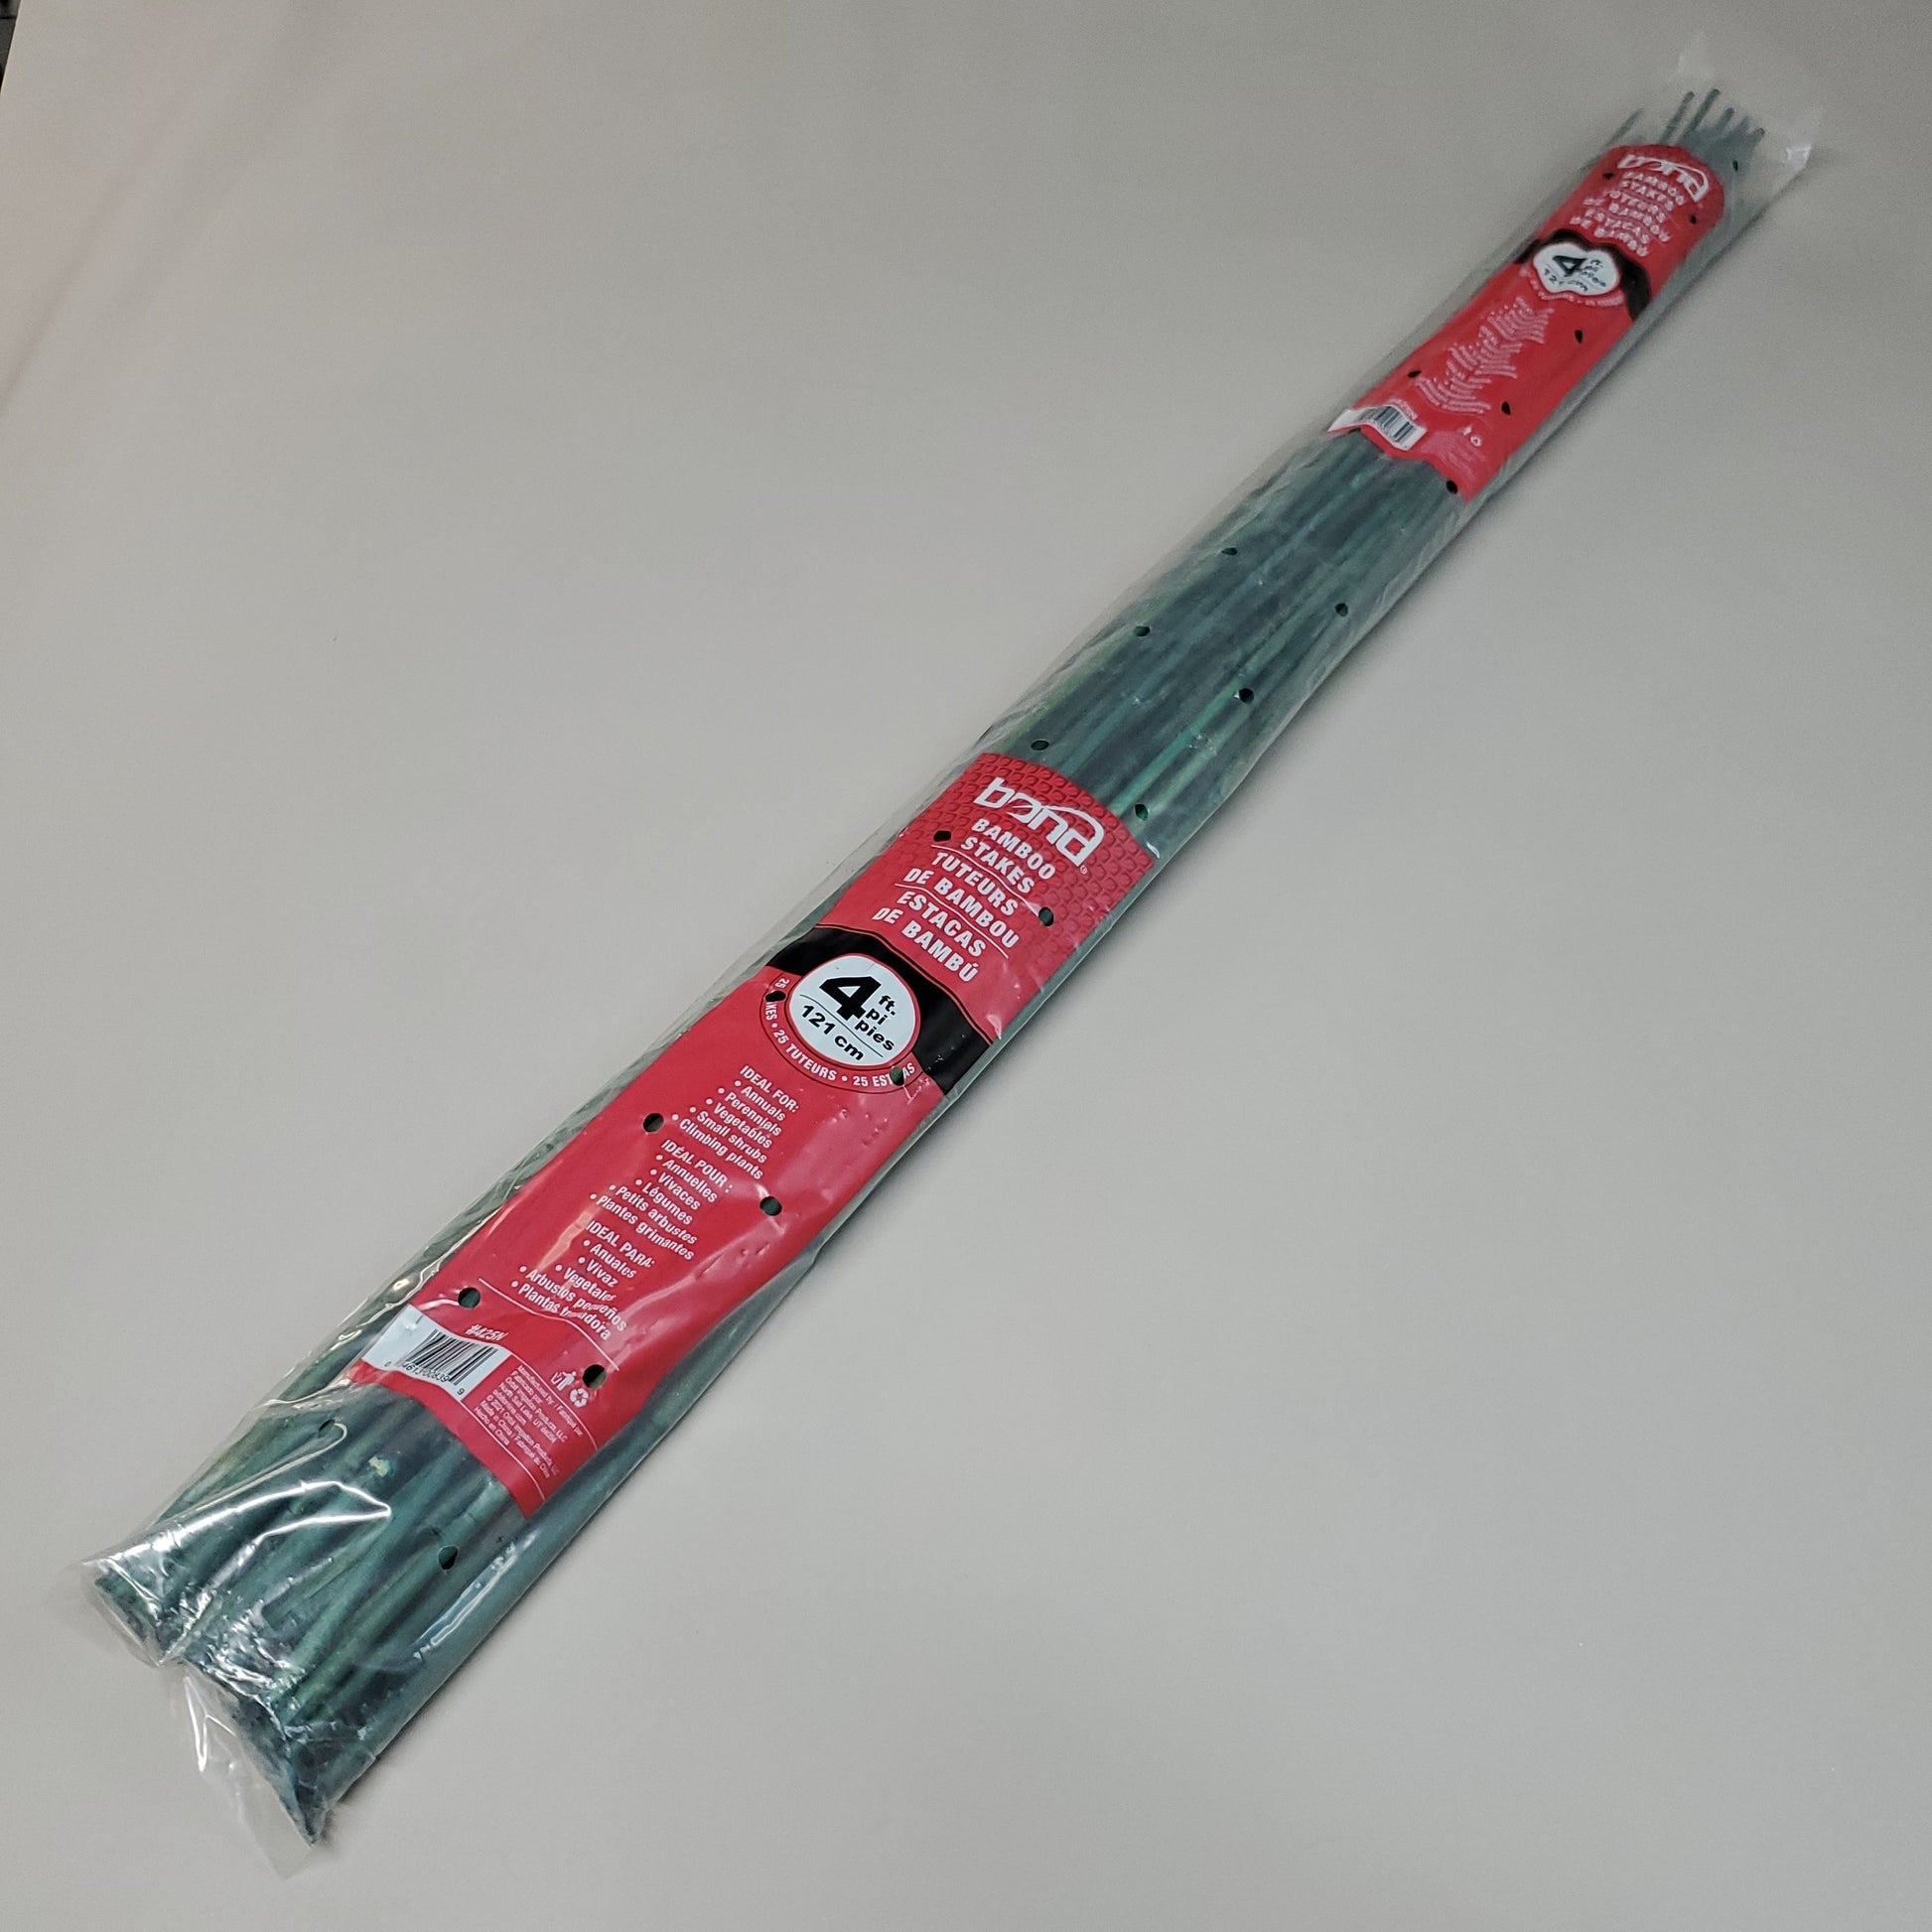 BOND Pack Of 25 Bamboo Stakes 4 Ft. Tall Green 425N By Orbit (New)